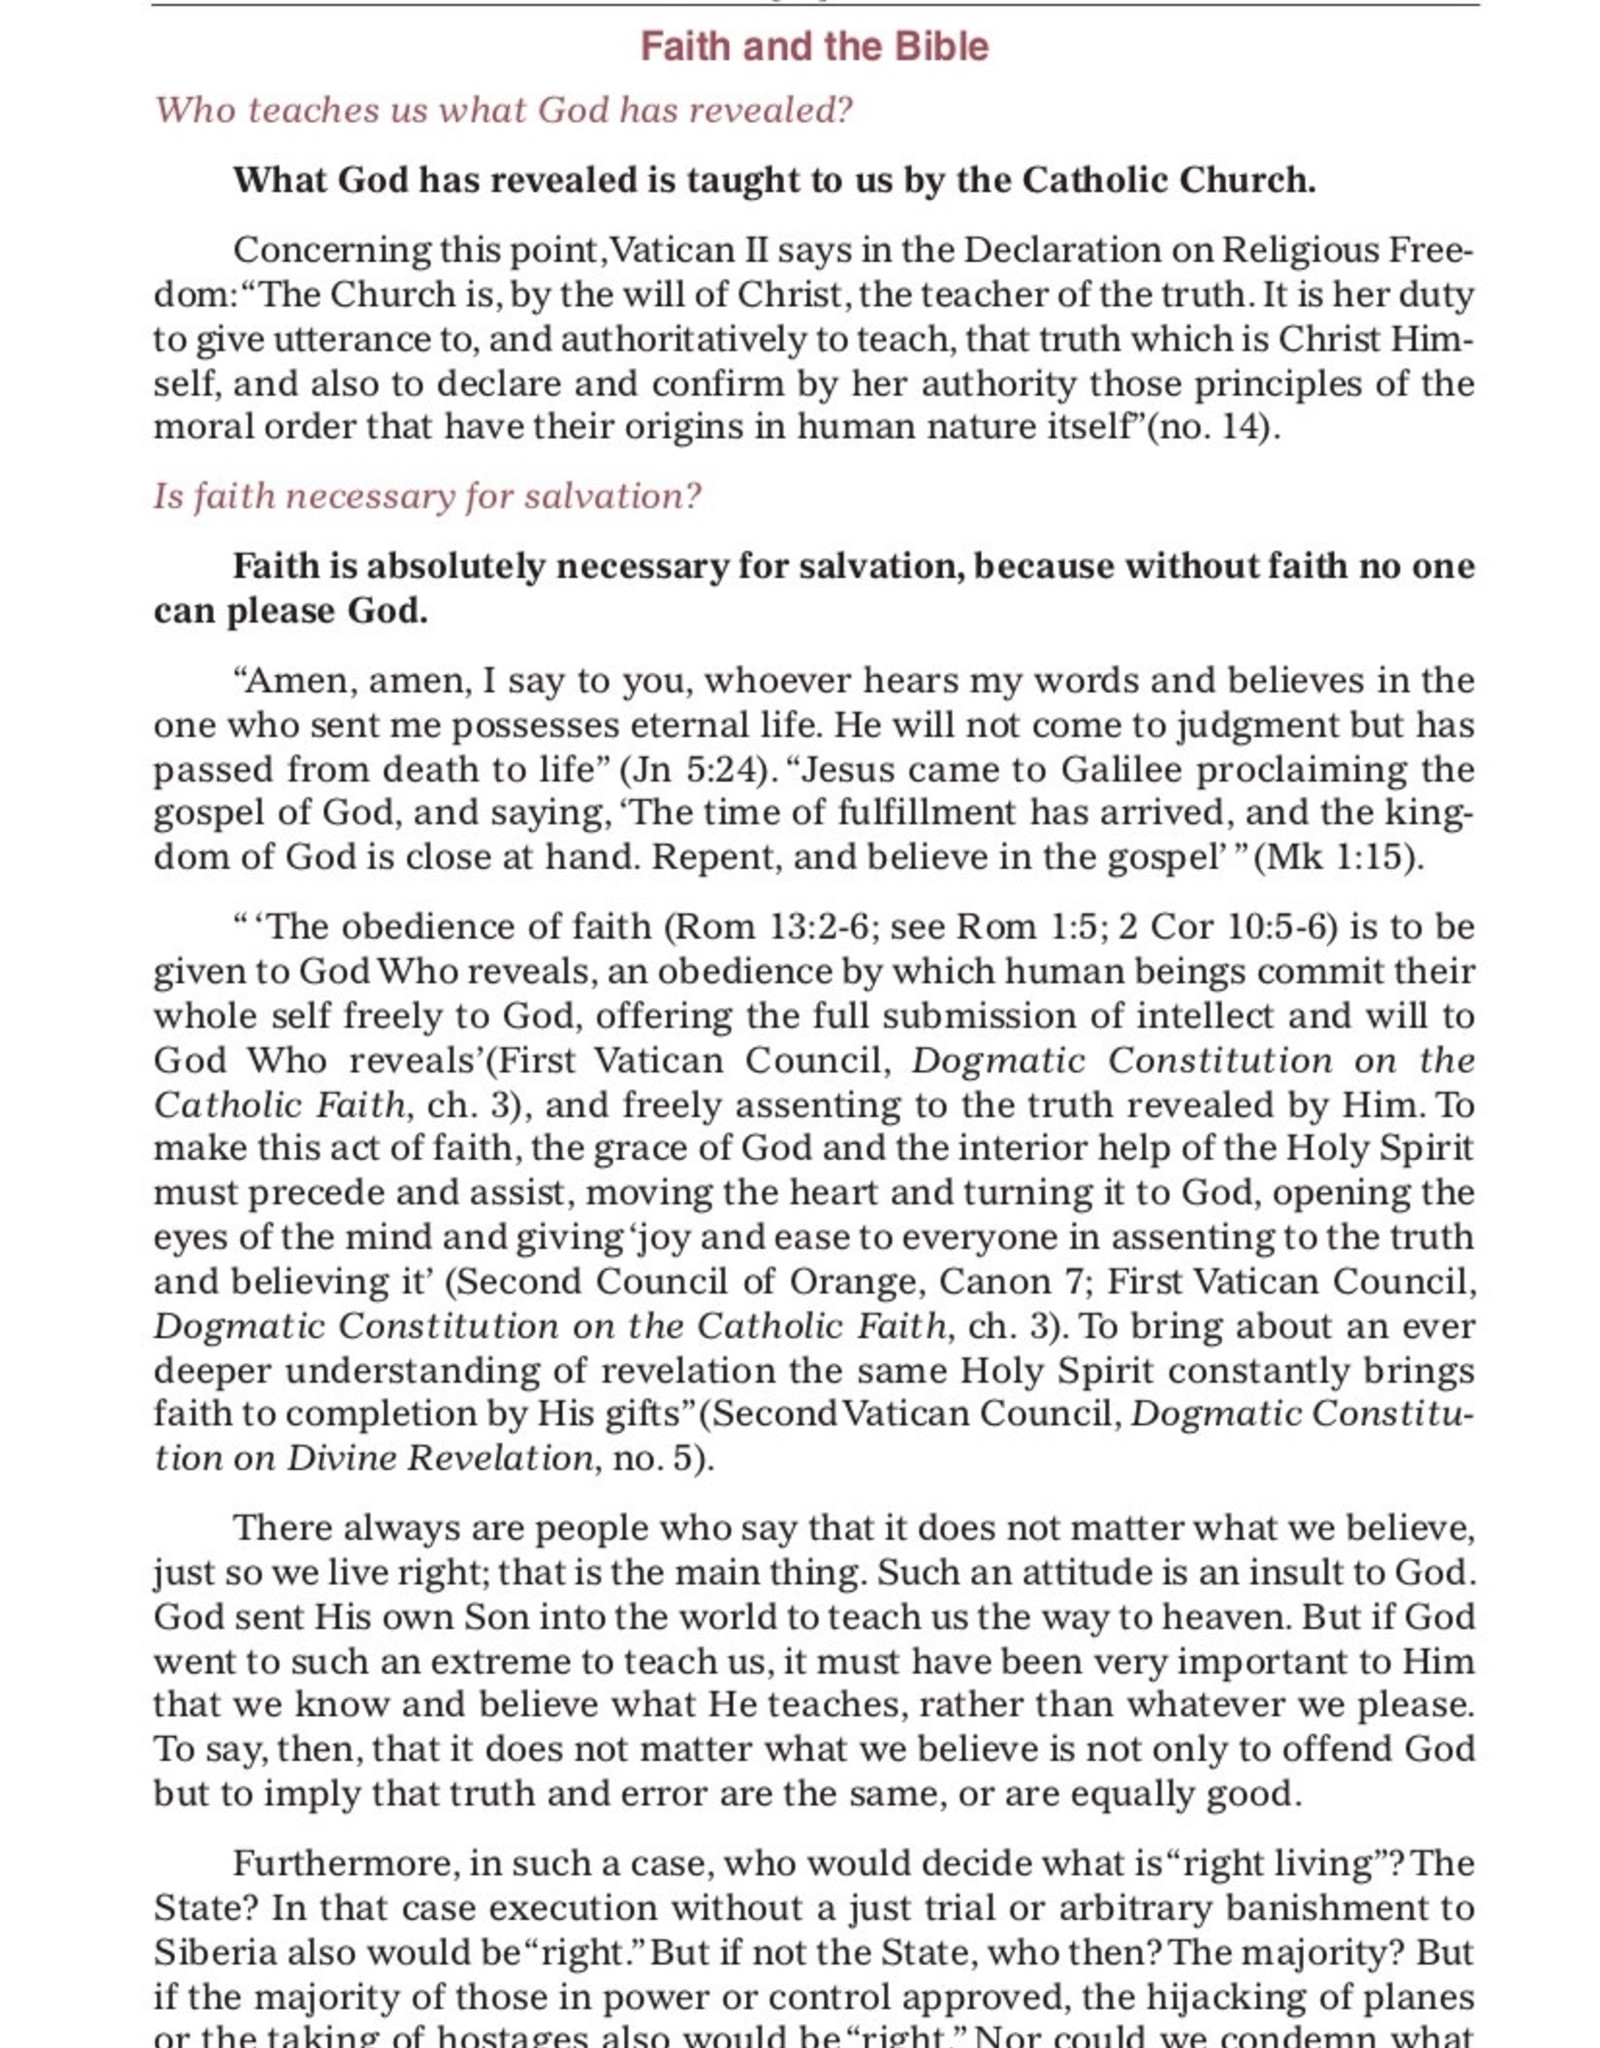 New Catholic Bible:  Confirmation Edition  (Red  DURA-LUX leather)